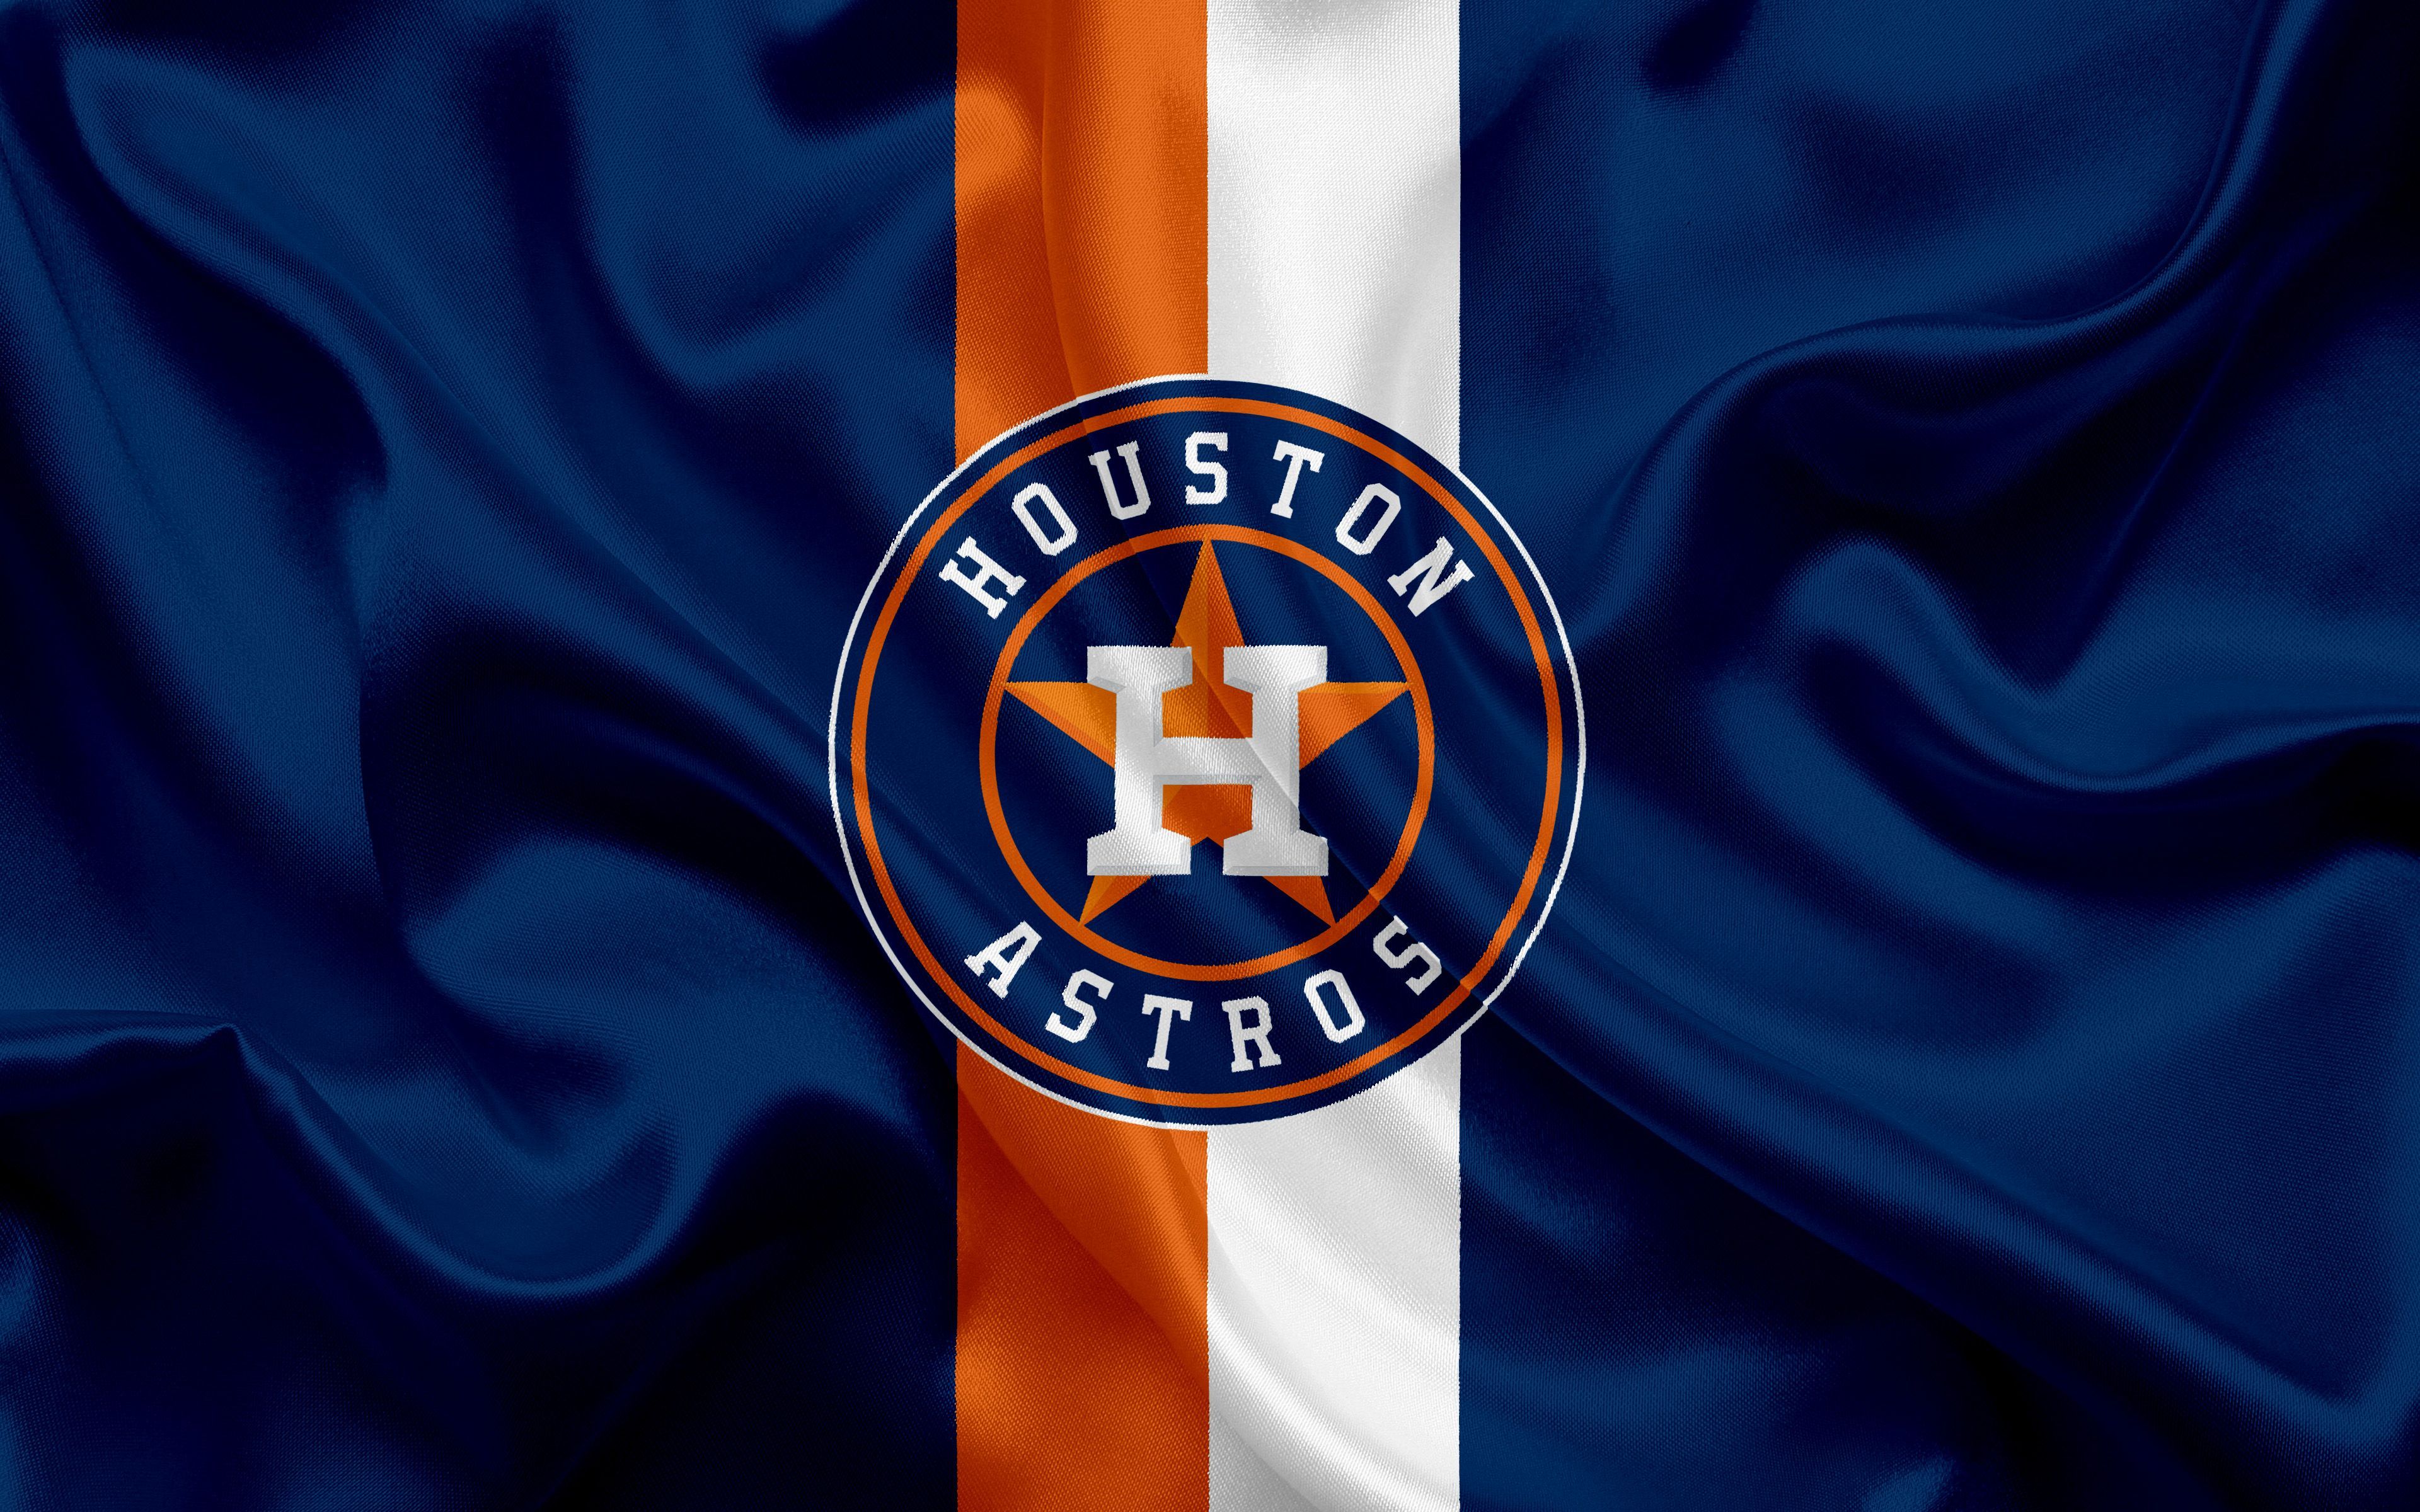 Houston Astros IPhone Wallpaper (79+ images)